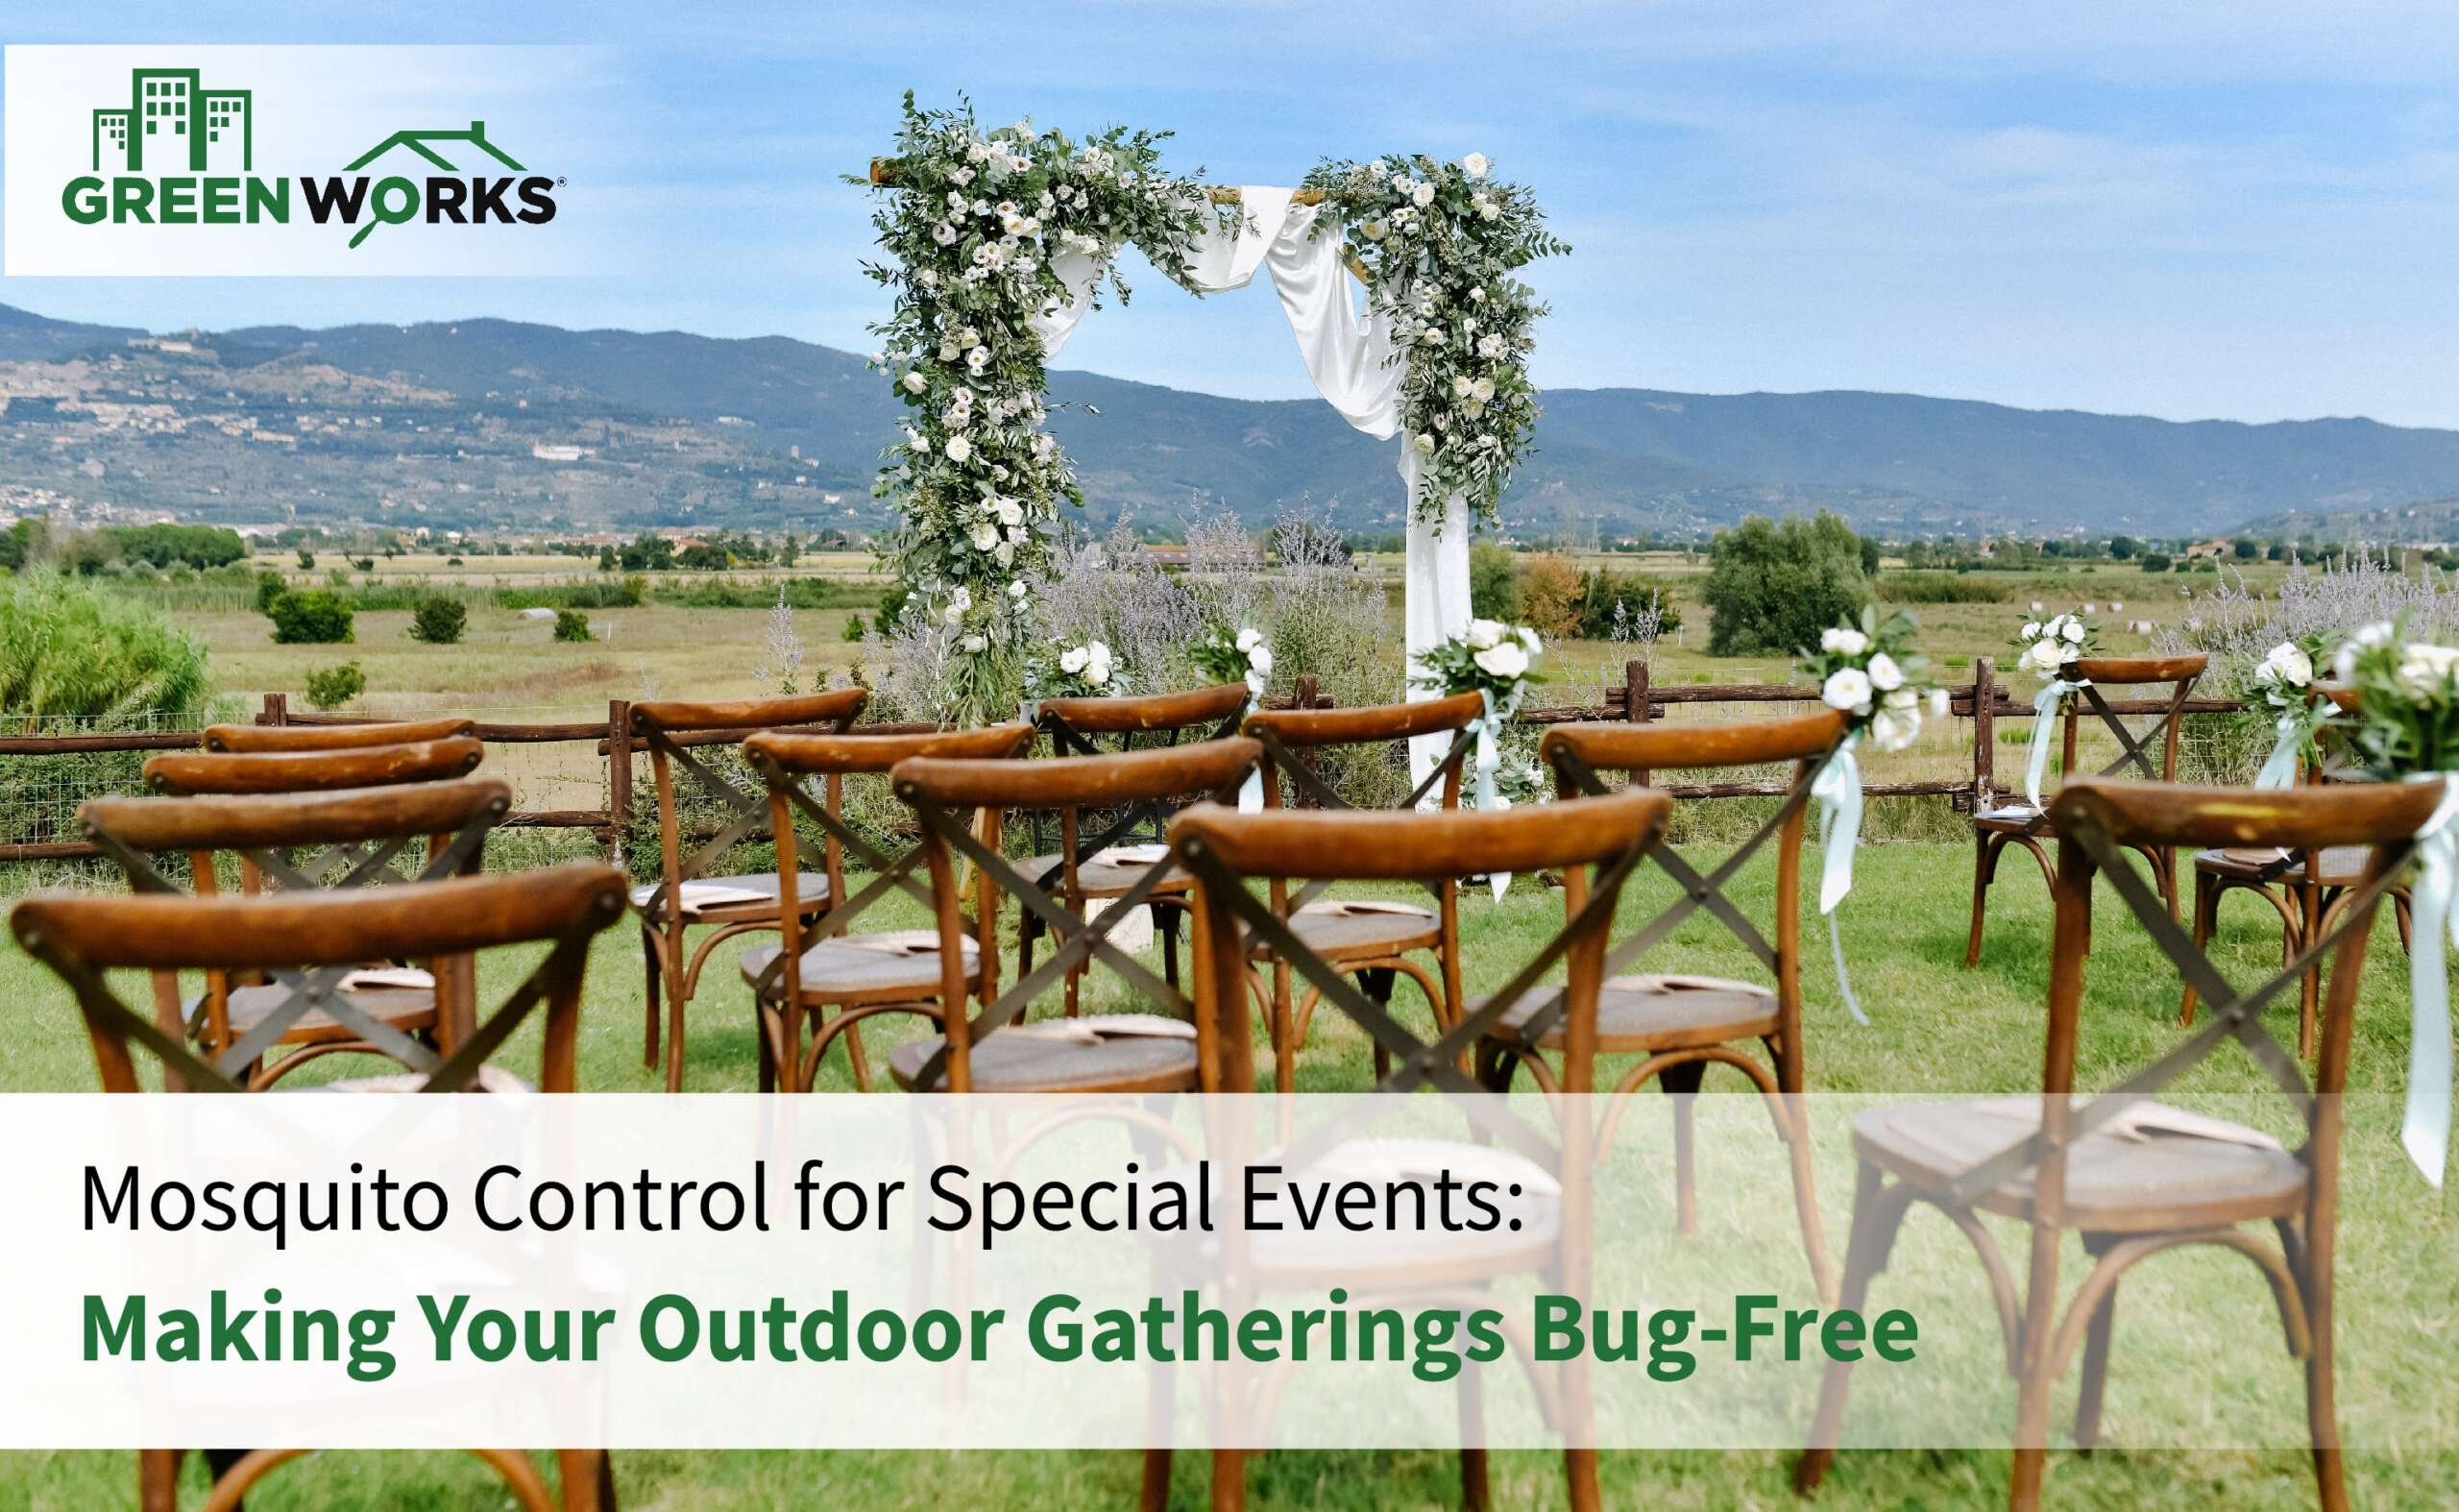 Mosquito Control for Special Events: Making Your Outdoor Gatherings Bug-Free